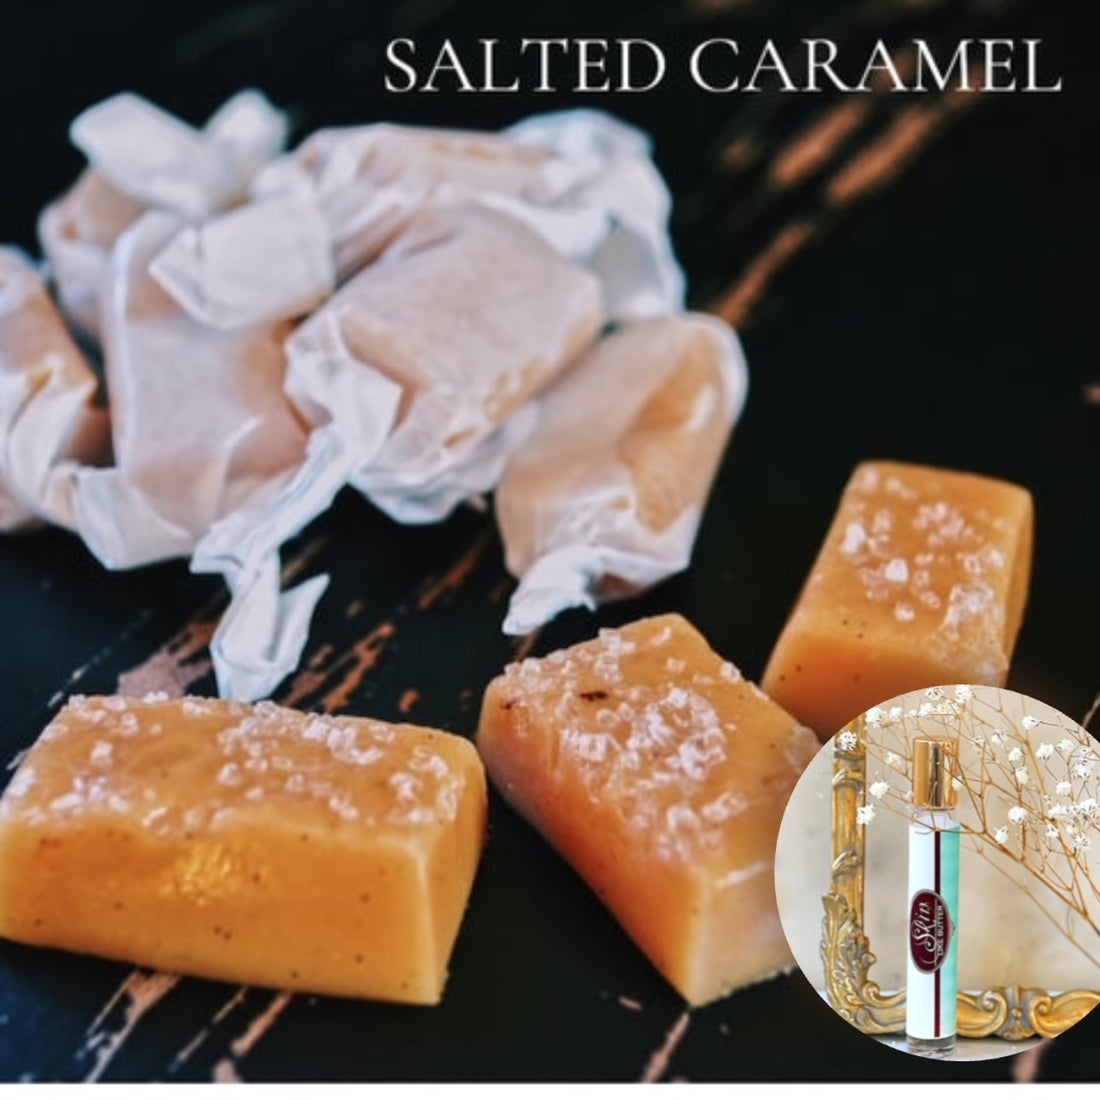 SALTED CARAMEL Roll on Perfume Sale! ~ Buy 1 get 1 50% off-use coupon code 2PLEASE